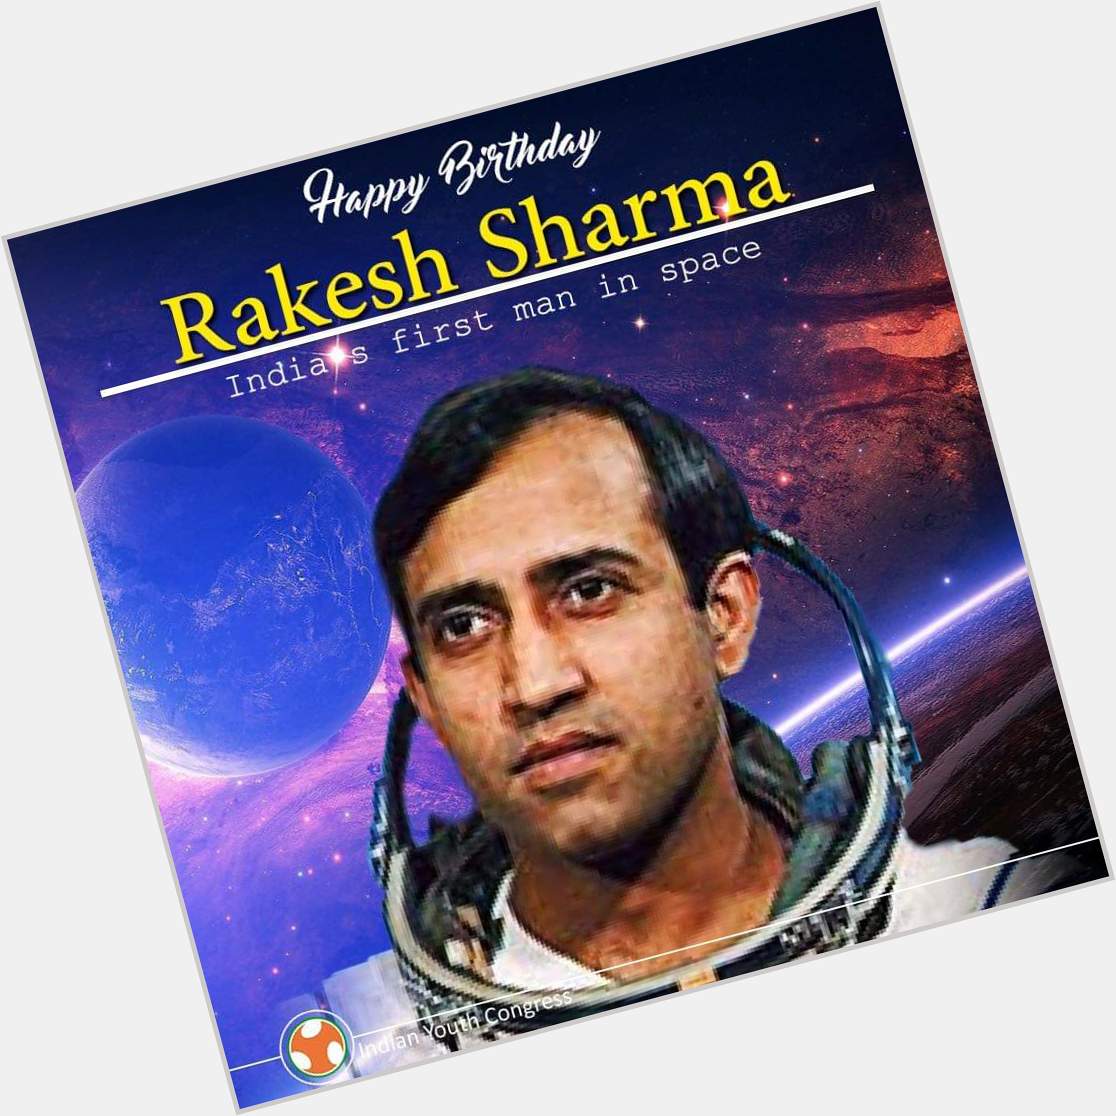 Happy Birthday to Rakesh Sharma - India\s First Man In Space !! 